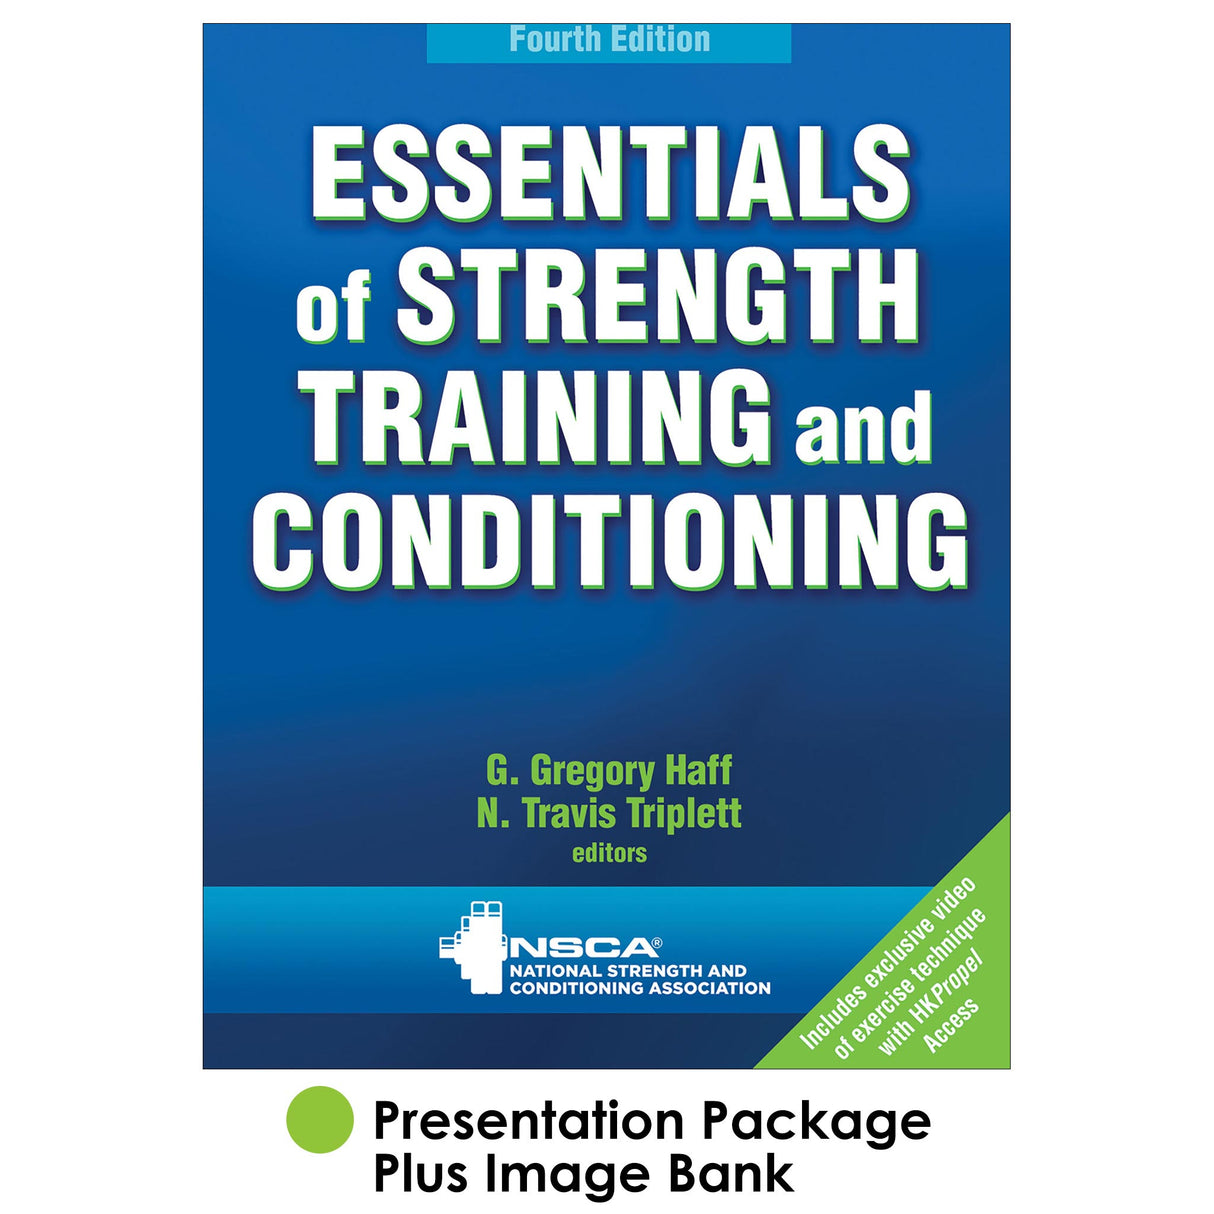 Essentials of Strength Training and Conditioning 4th Edition HKPropel Presentation Package Plus Image Bank